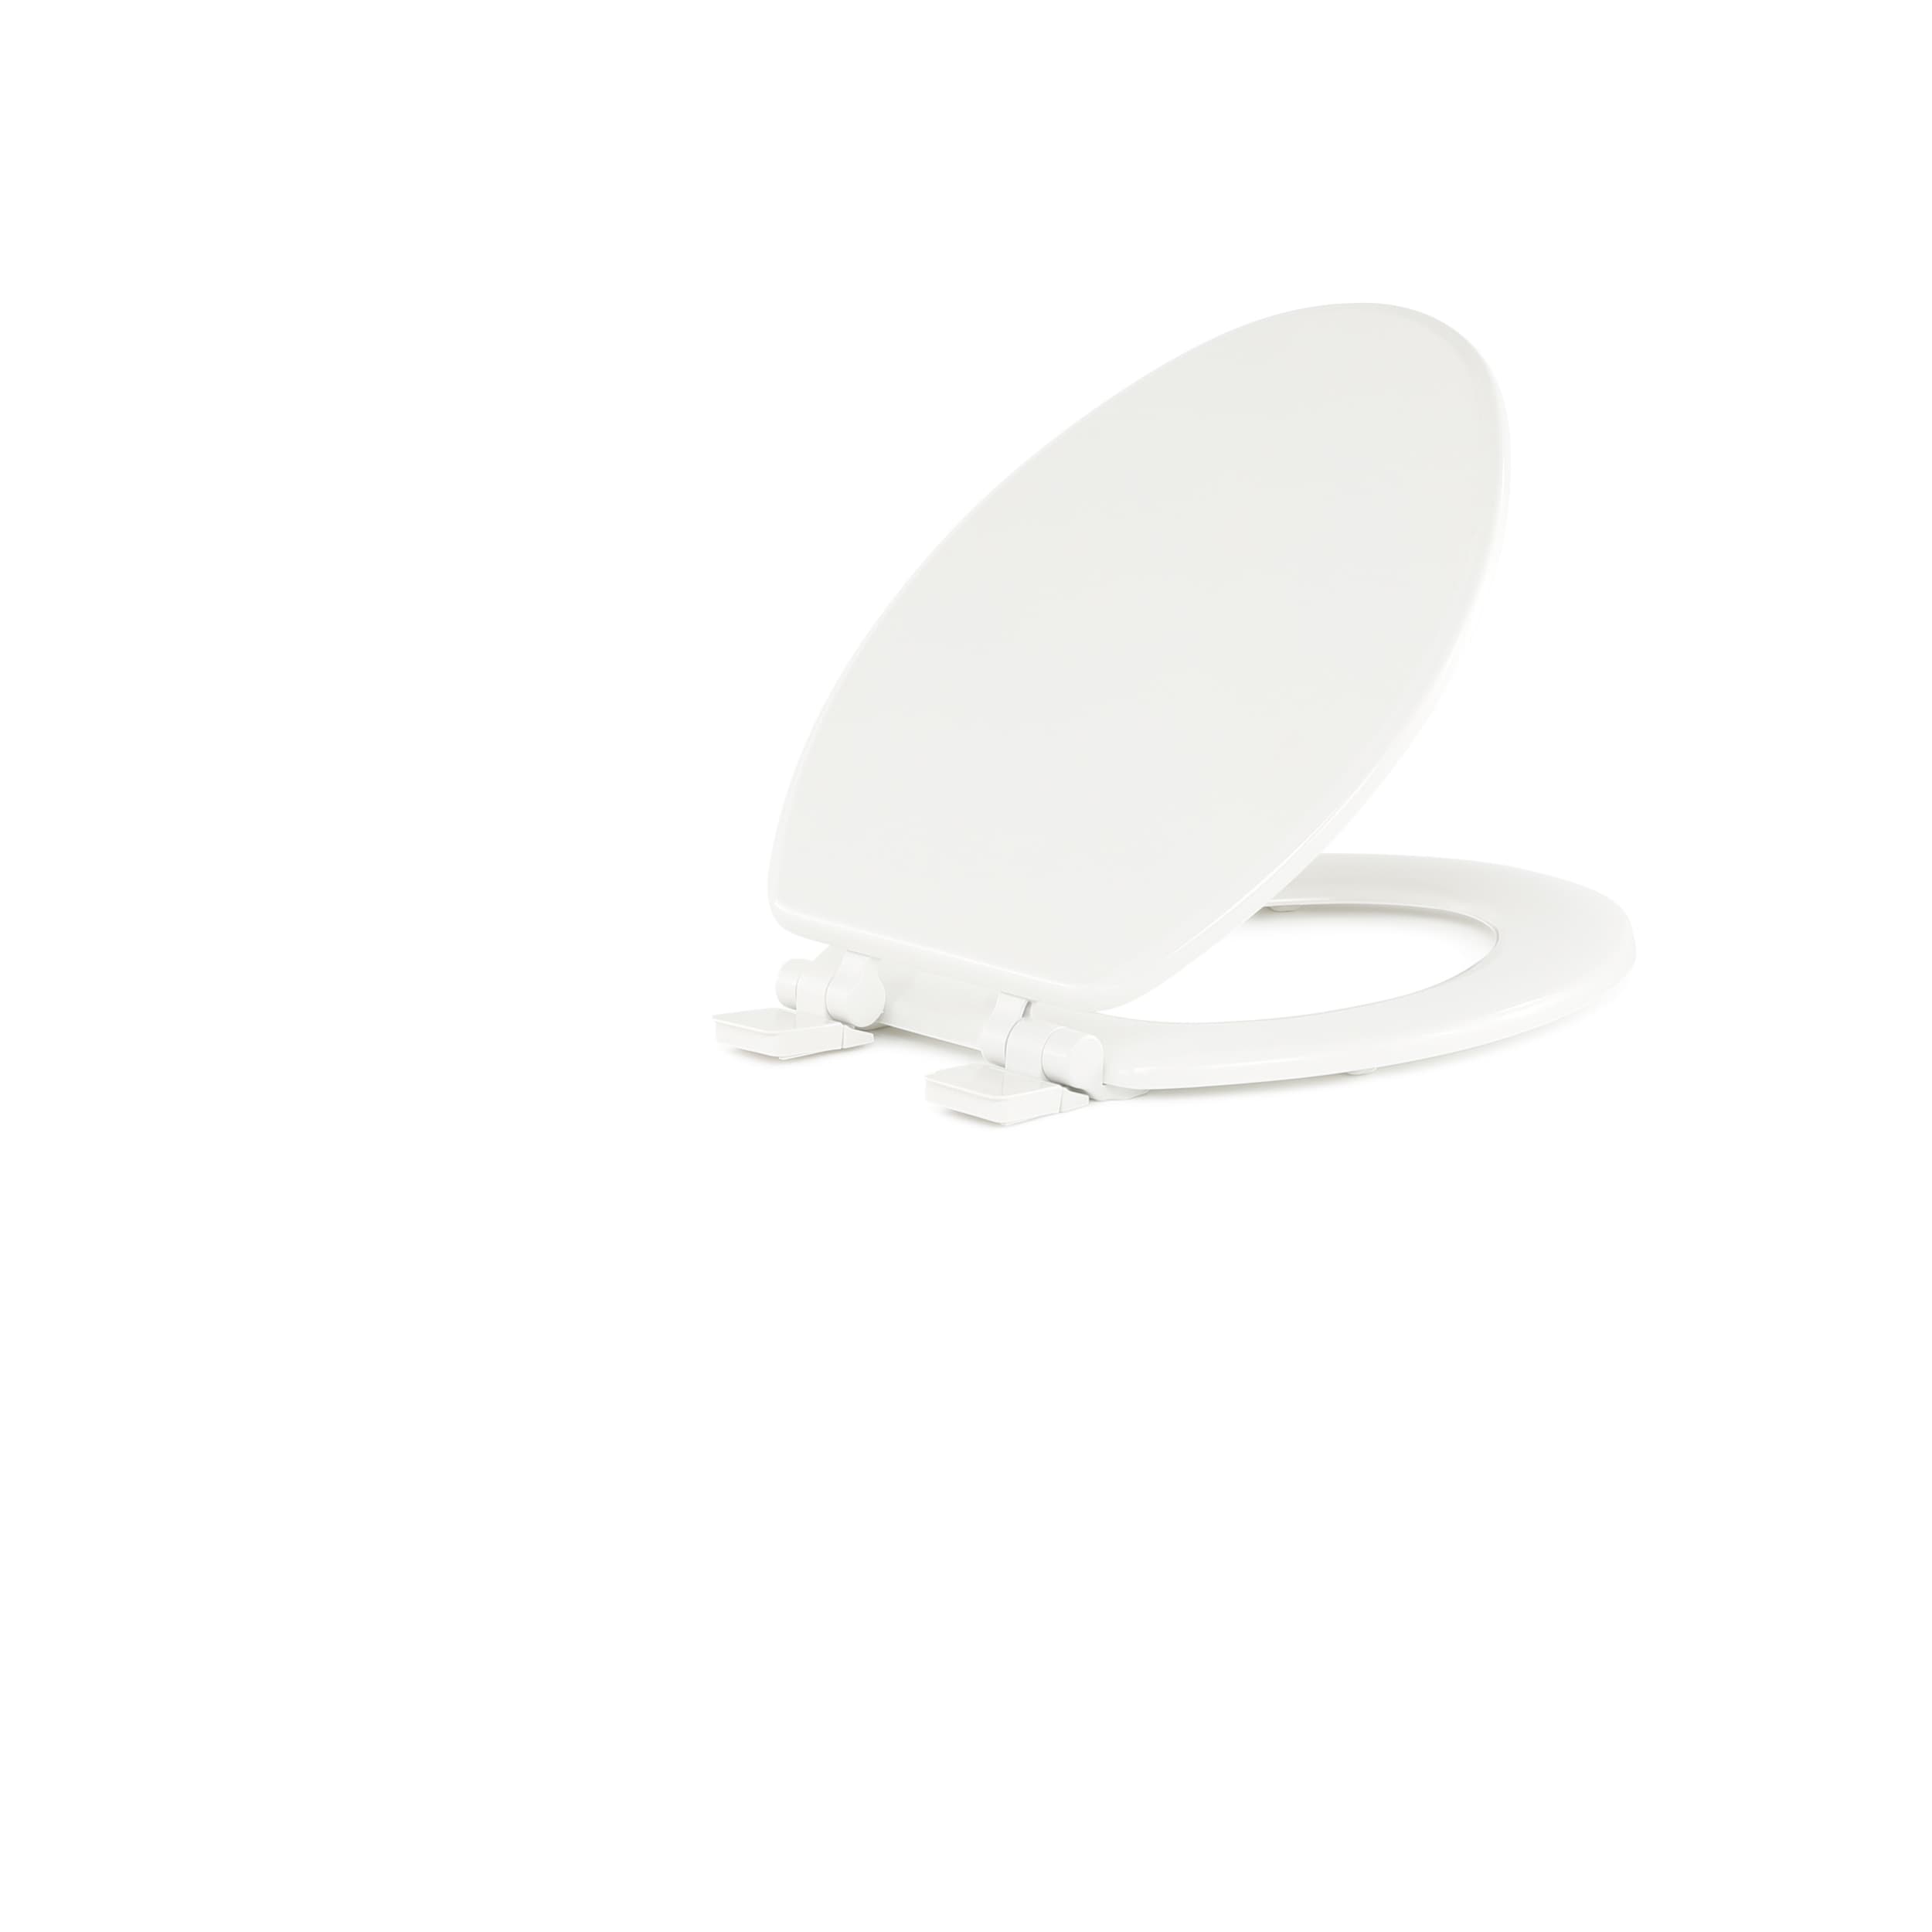 Standard Oval Soft Close Toilet Seat Universal Fitment Suit Most Toilets White 